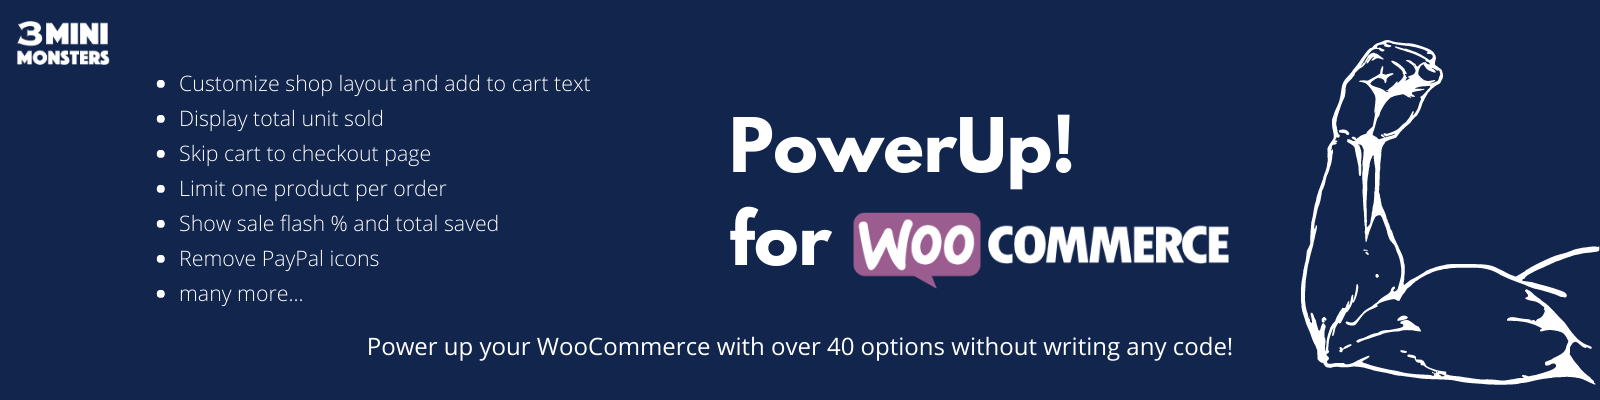 PowerUp! for WooCommerce